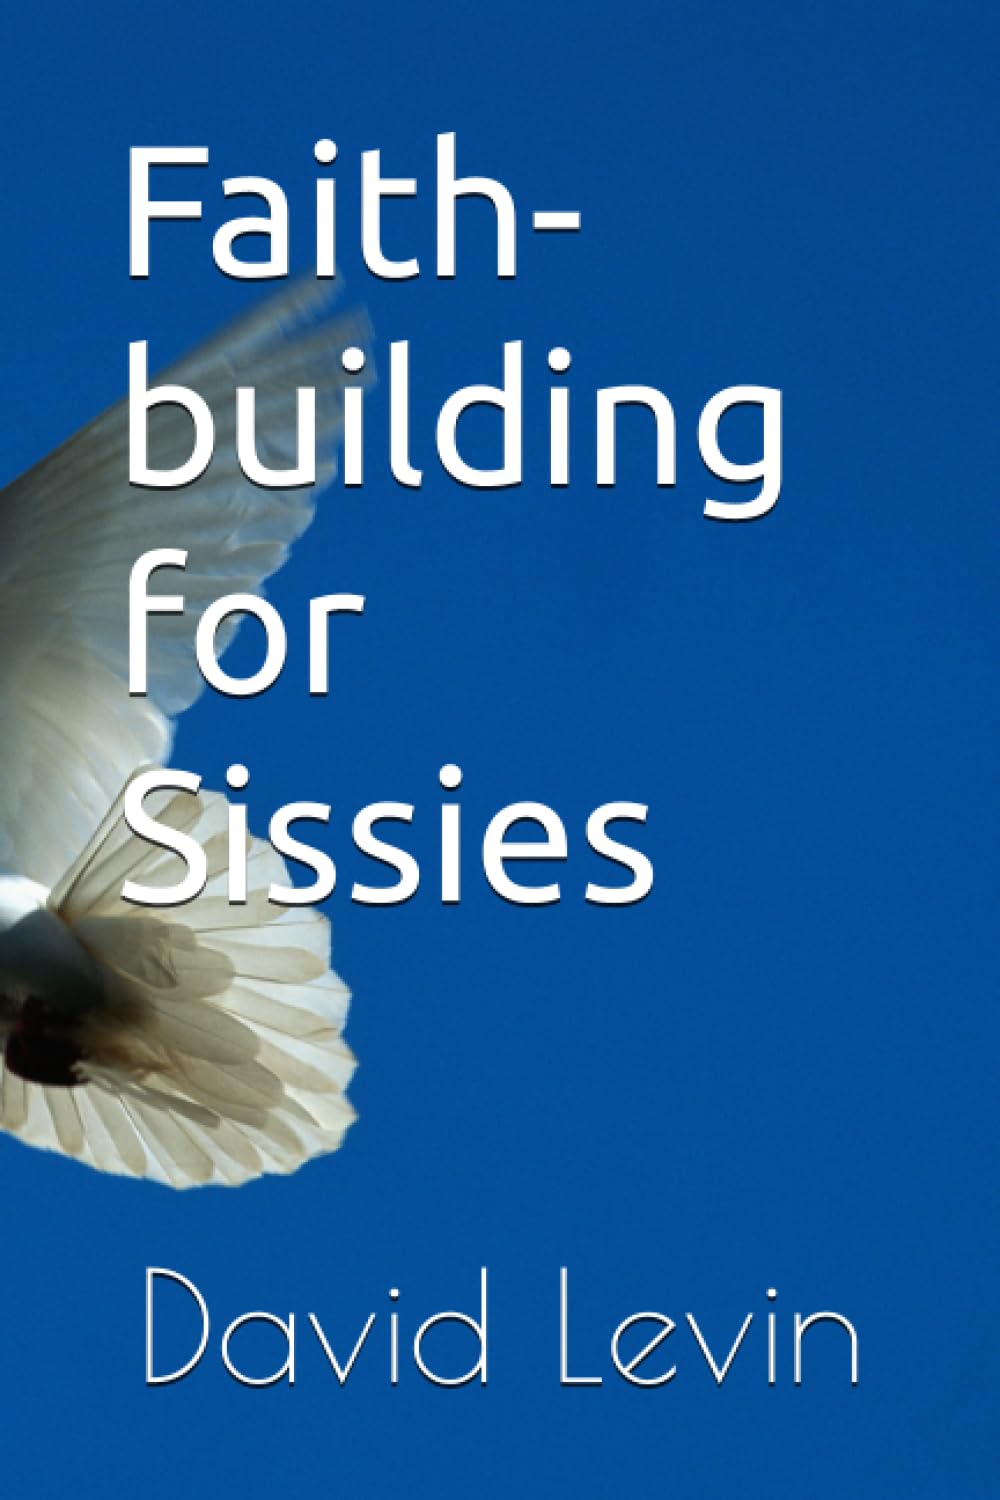 Faith-building for Sissies by David Levin